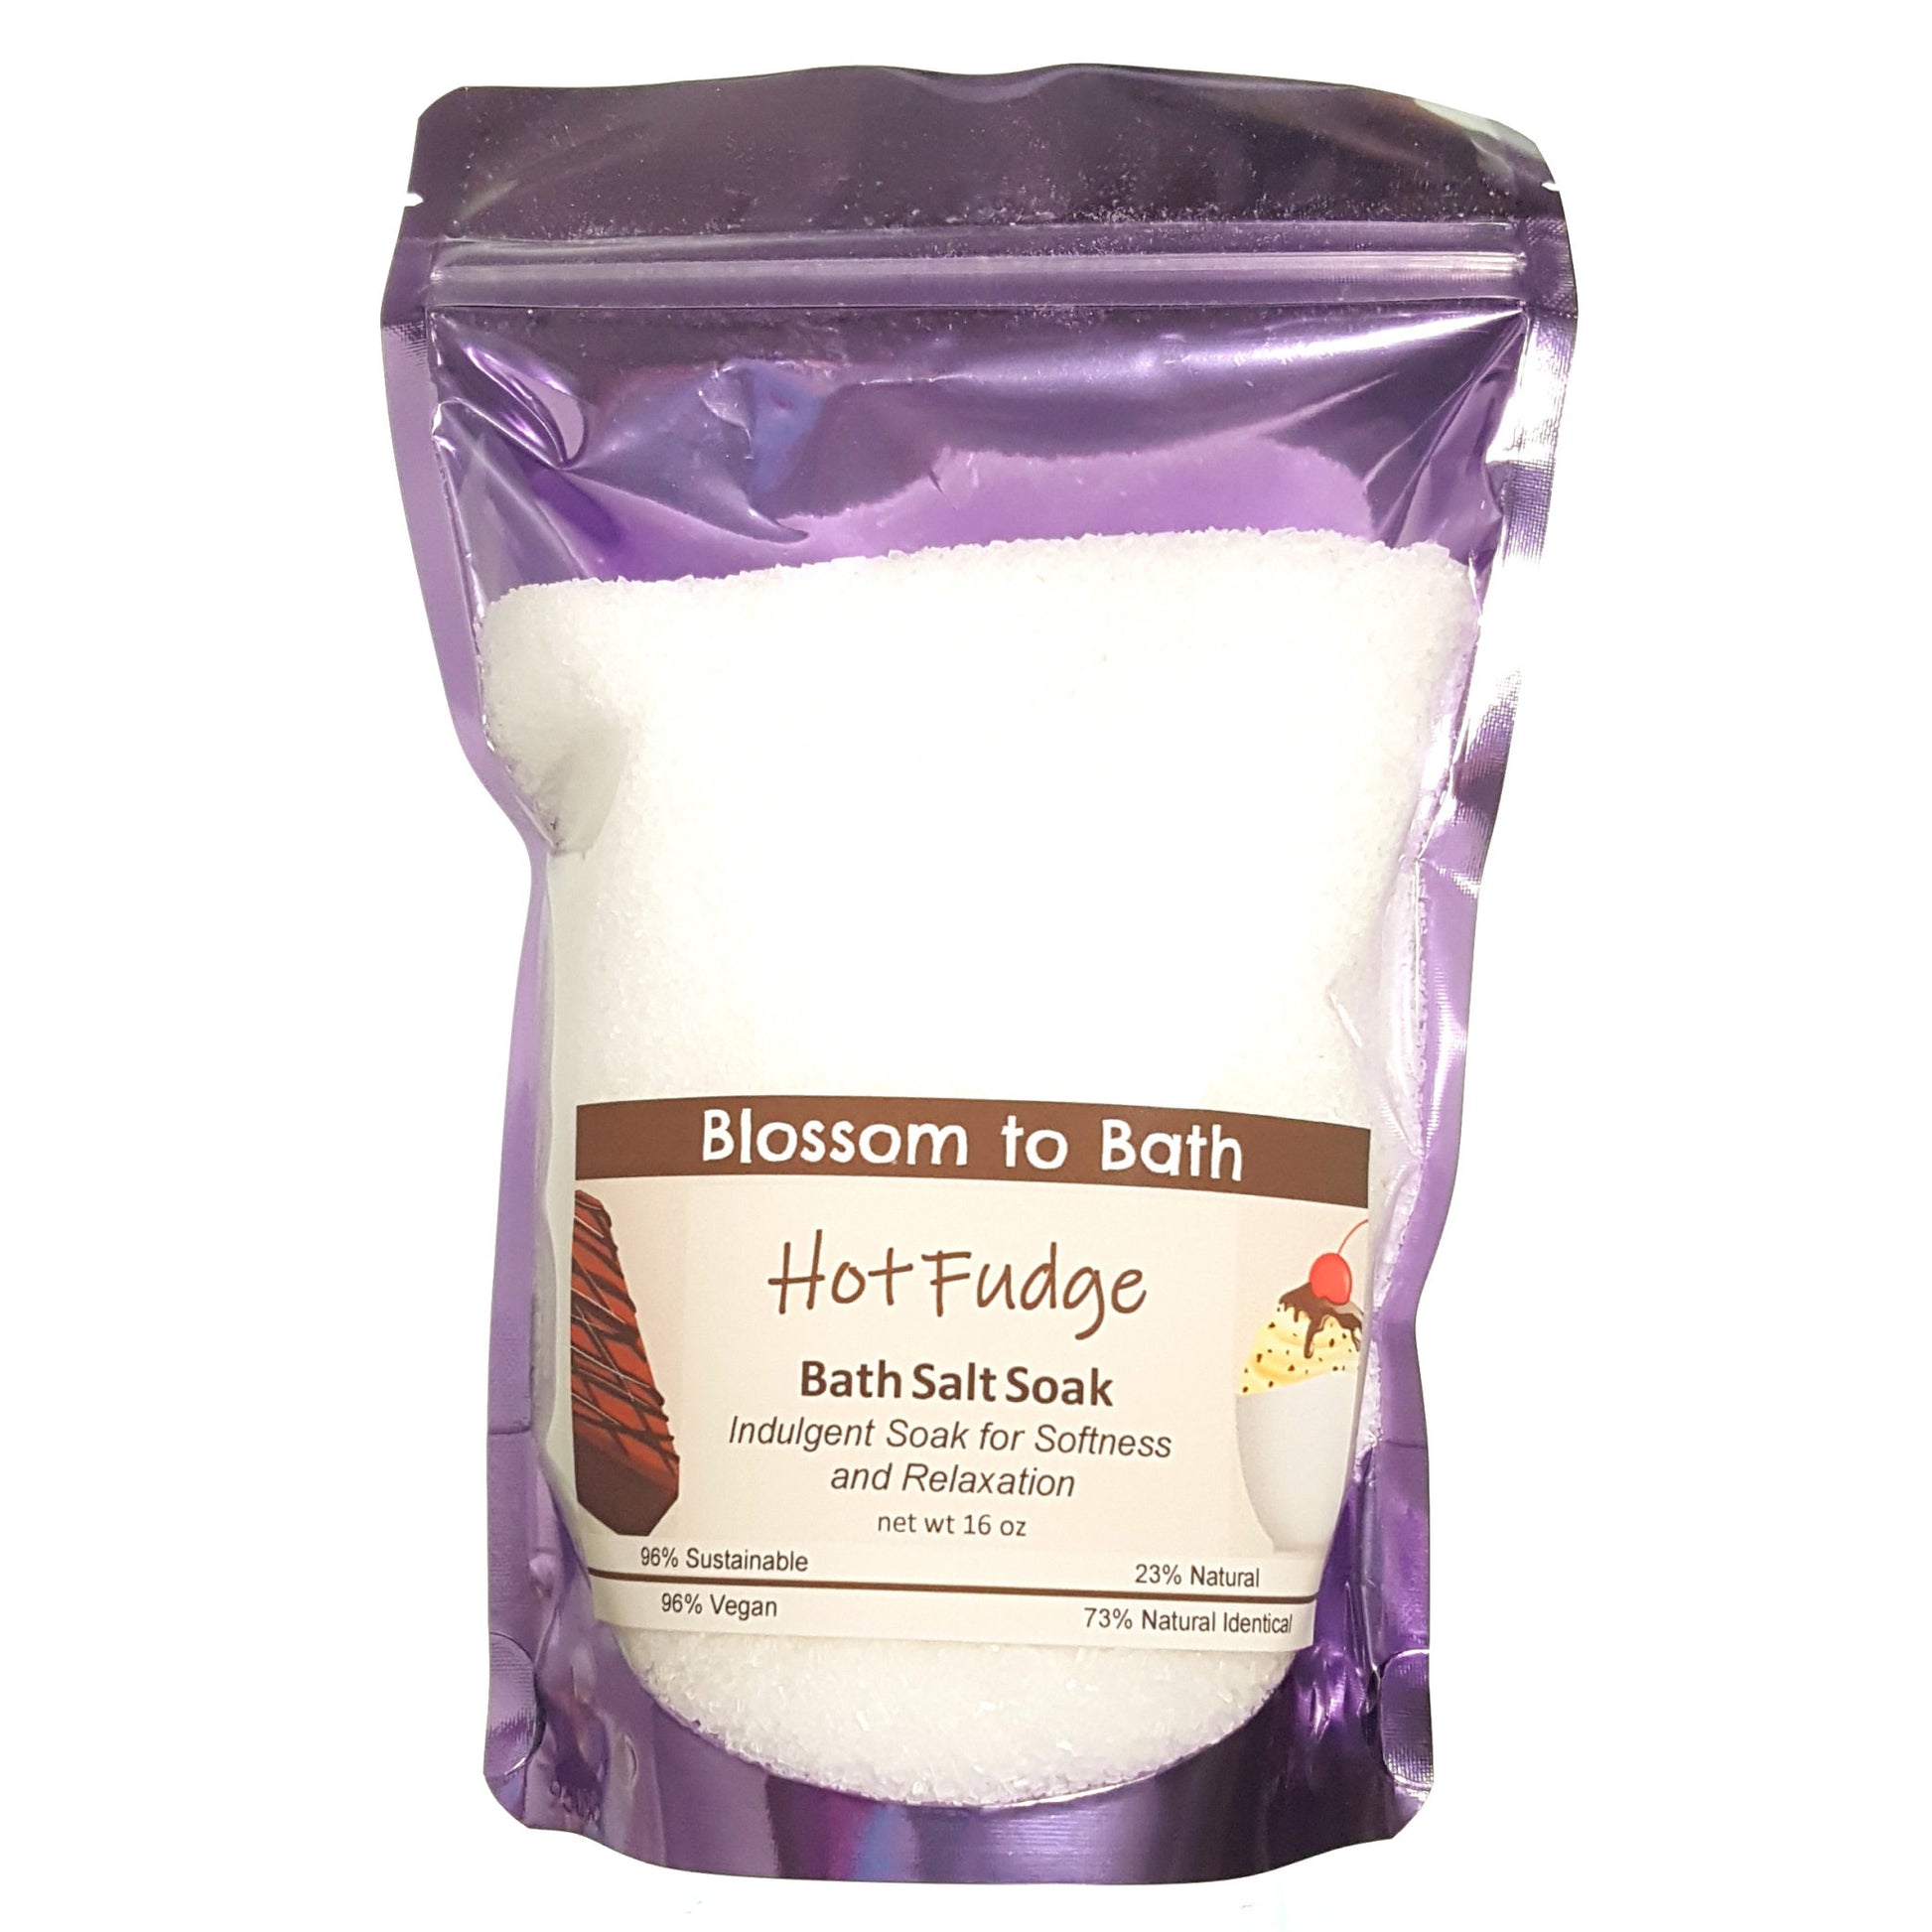 Buy Blossom to Bath Hot Fudge Bath Salt Soak from Flowersong Soap Studio.  Scented epsom salts for a luxurious soaking experience  The fragrance is three layers deep in rich chocolate.